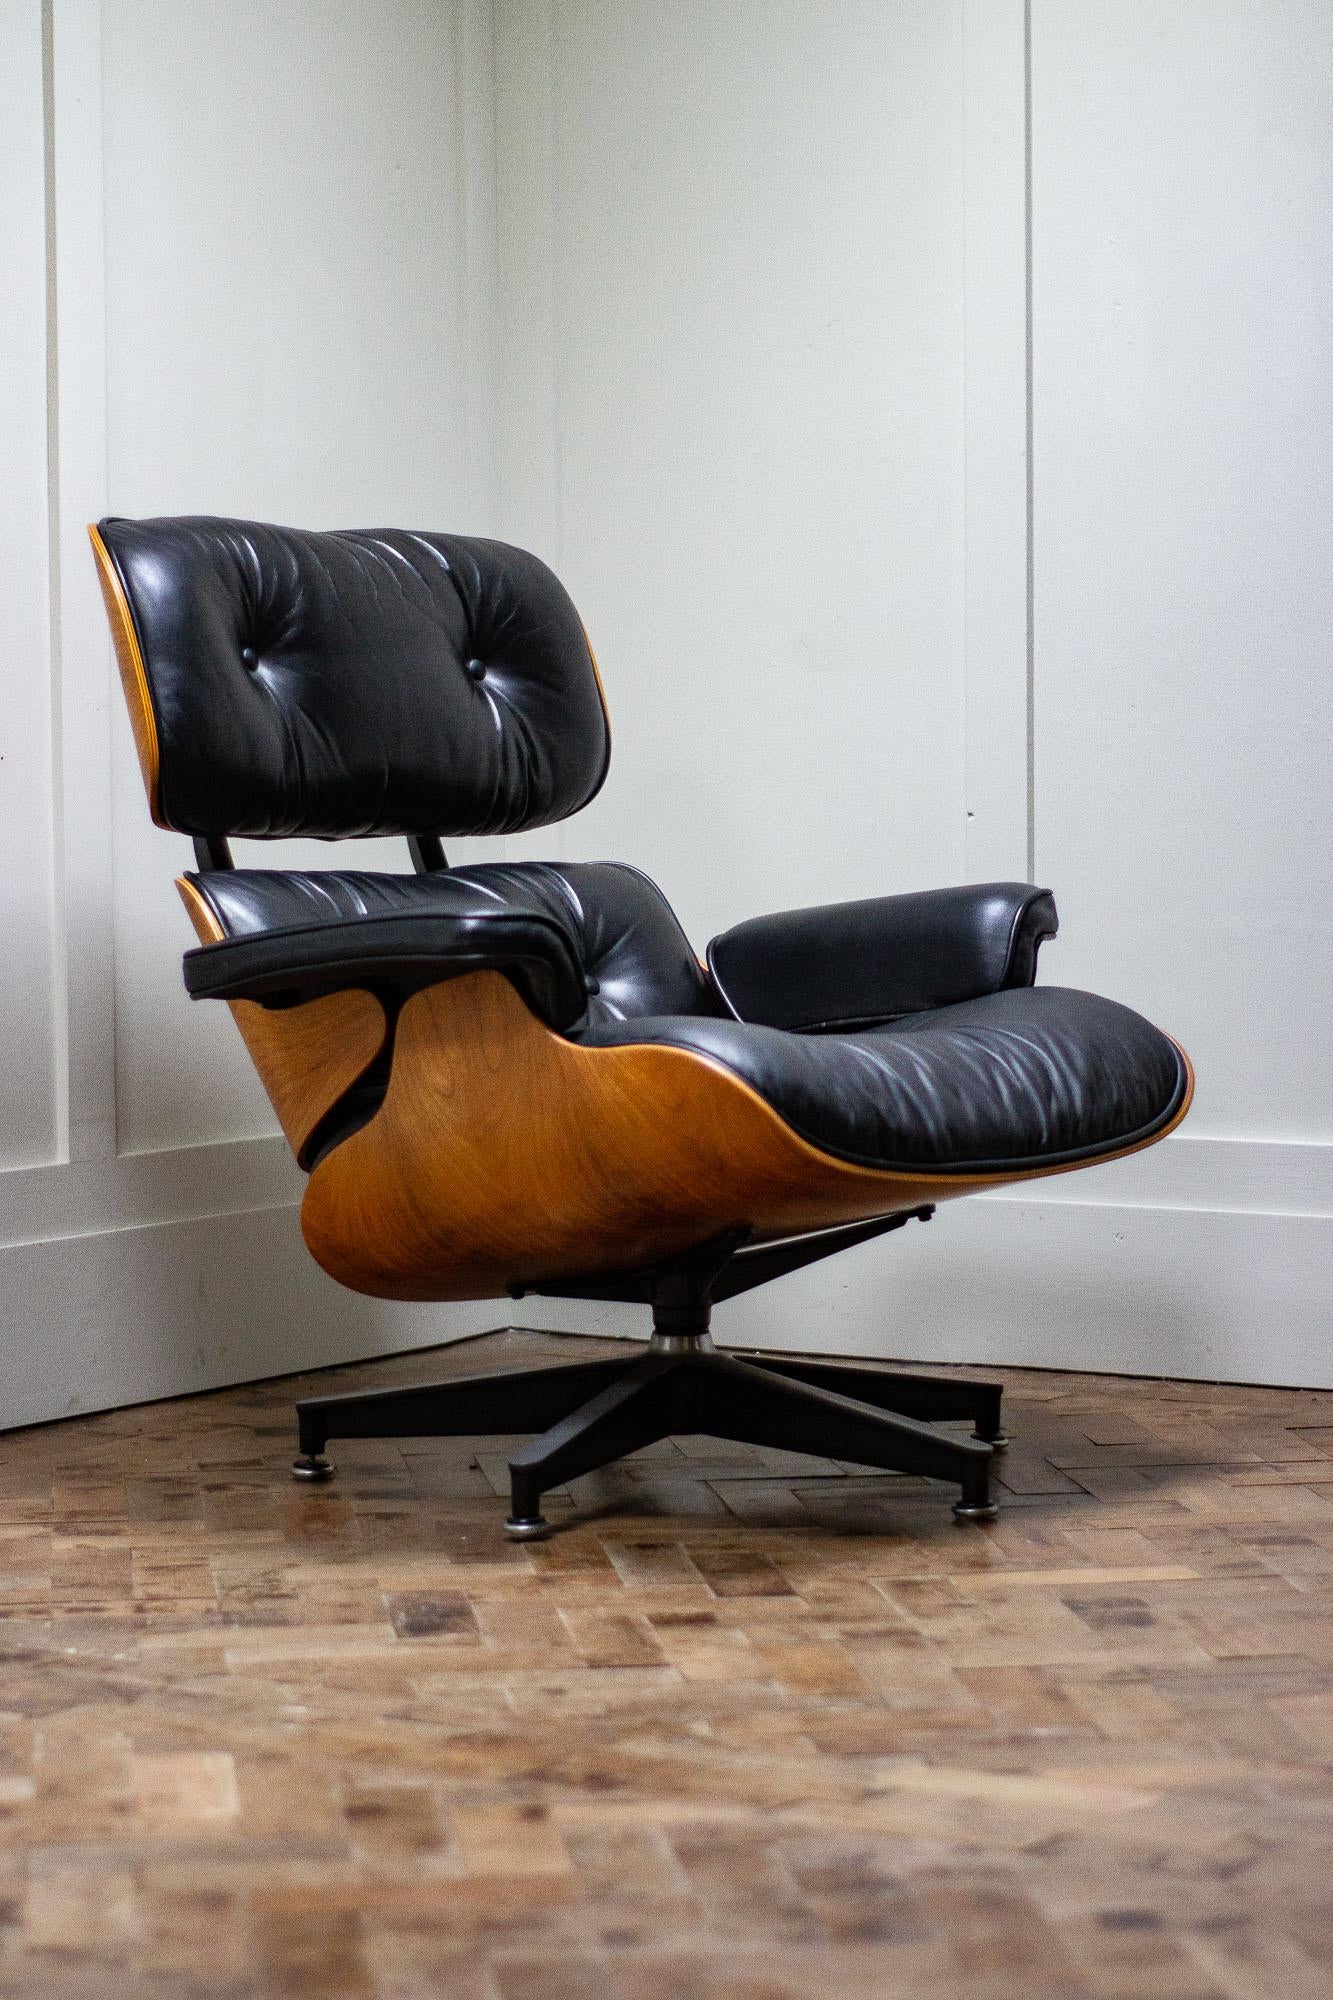 Original Charles & Ray Eames lounge chair produced by Herman Miller, model 670.

Coming in black leather with Palisander ply veneer. 

Great Condition and all the glides and pieces are present.